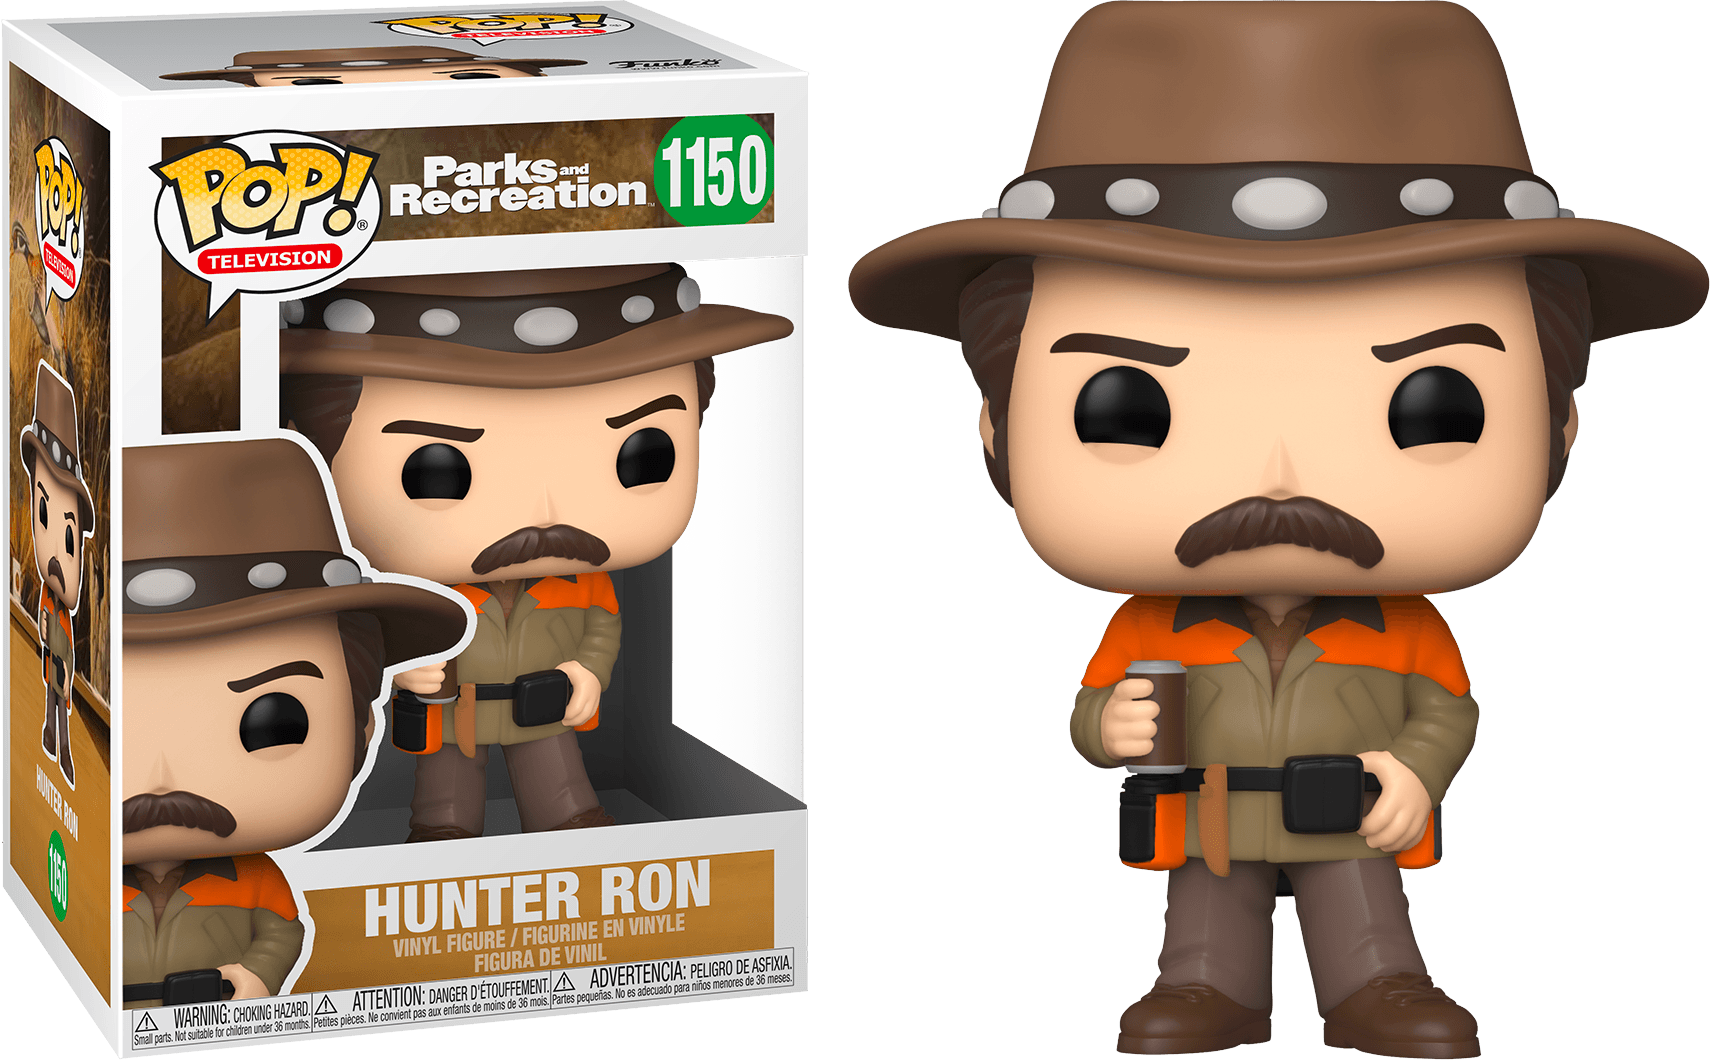 FUN56168 Parks and Recreation - Hunter Ron (With Chase) Pop! Vinyl - Funko - Titan Pop Culture